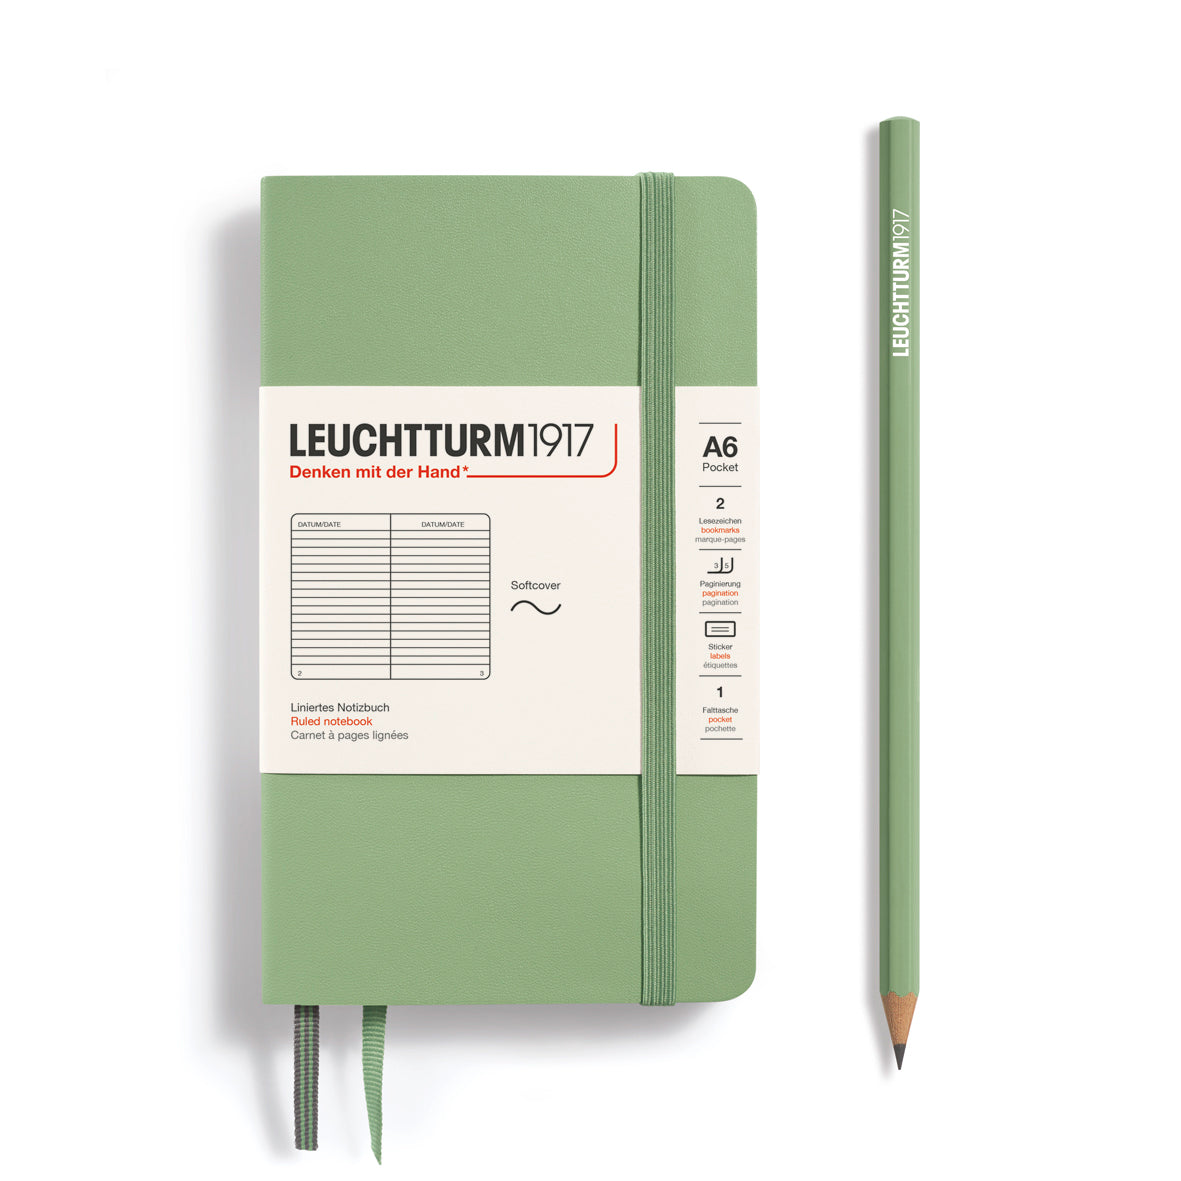 LEUCHTTURM1917 Notebook A6 Pocket Softcover in sage green and ruled inside at Penny Black